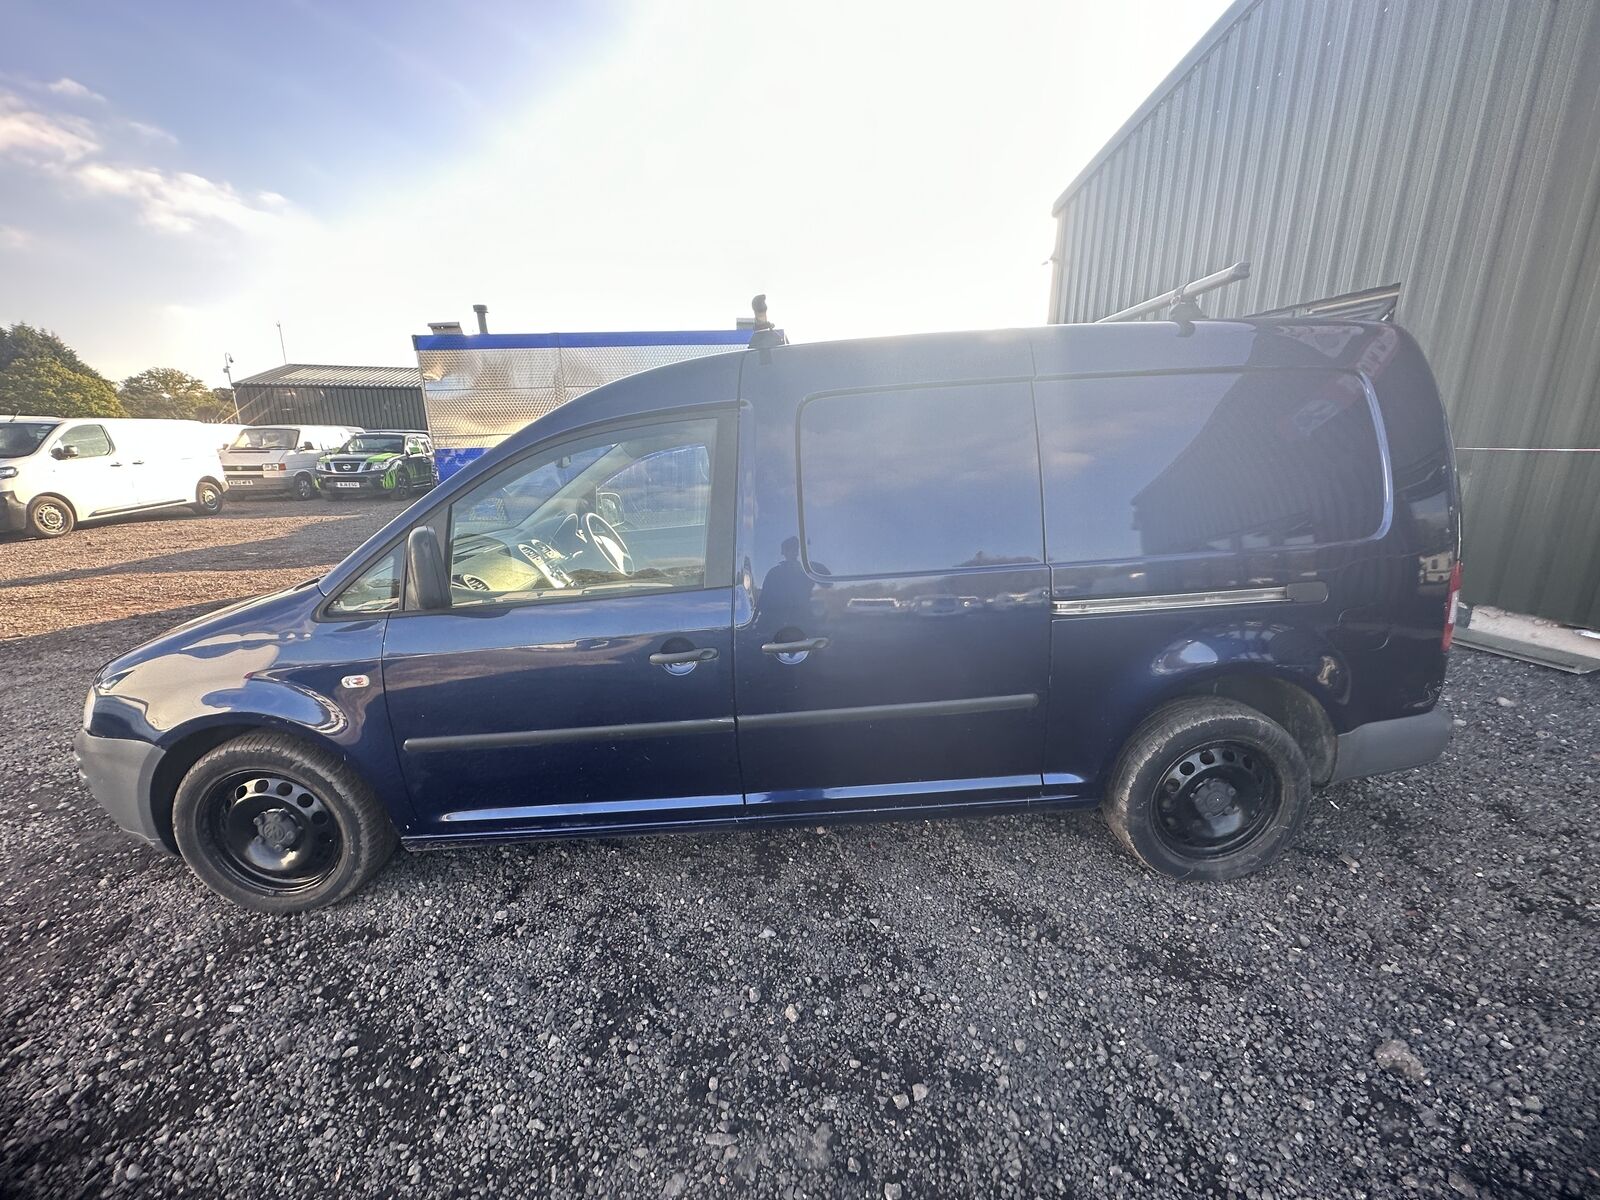 Bid on DEPENDABLE VW CADDY MAXI C20: 6-SPEED MANUAL - NO VAT ON HAMMER- Buy &amp; Sell on Auction with EAMA Group